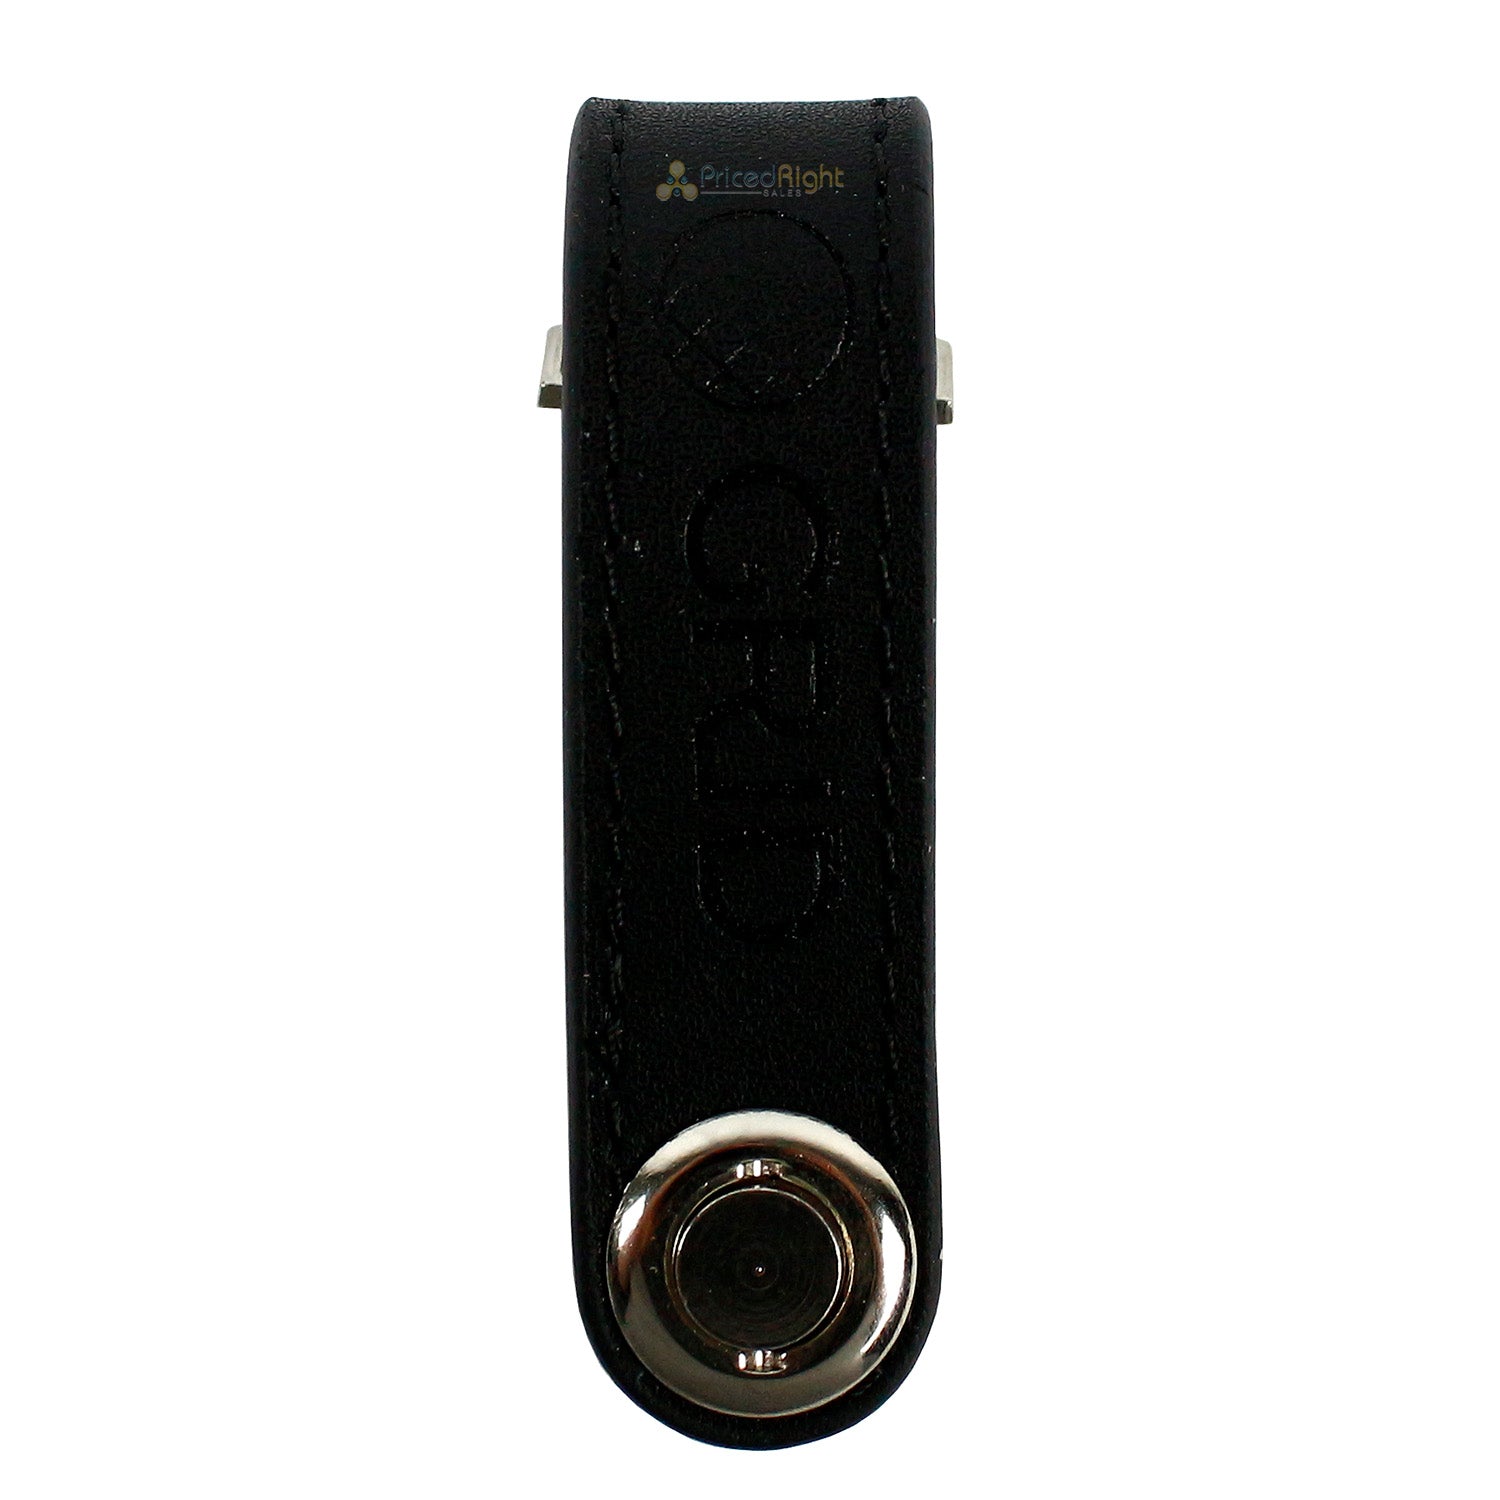 GRID Wallet SMRTKey Black Key Ring Made With A High-Quality Full-Grain Leather